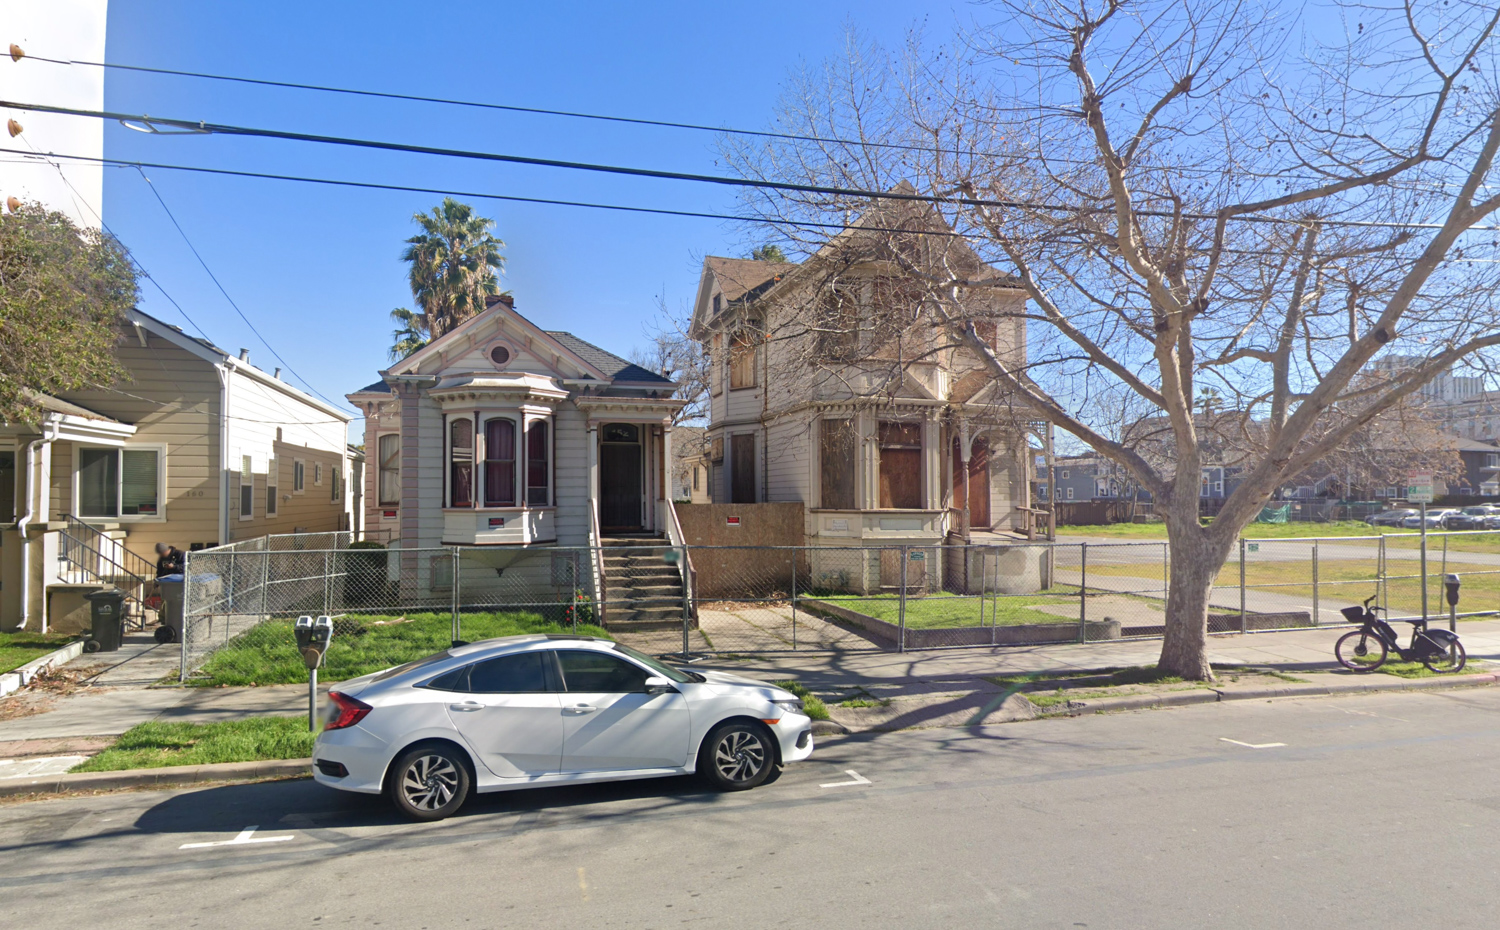 Queen Anne houses at 146 and 152 North 4th Street, image by Google Street View